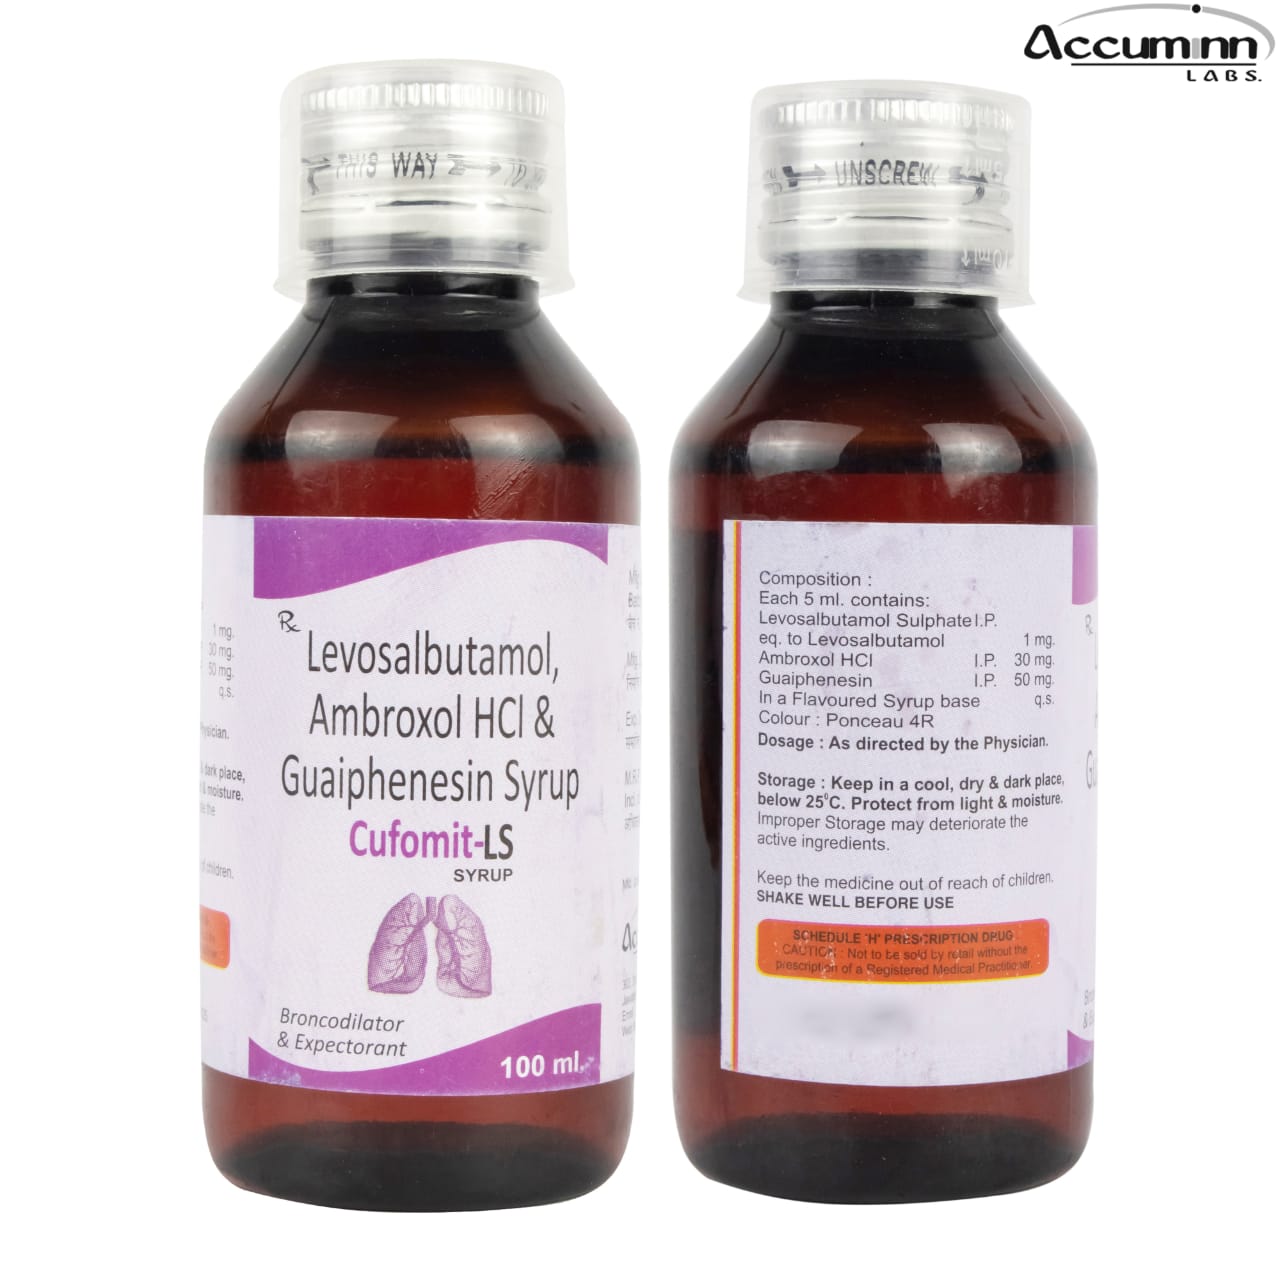 Product Name: Cufomit LS, Compositions of Cufomit LS are Levosalbutamol , Ambroxol HCL & Guaiphenesin Syrup - Accuminn Labs